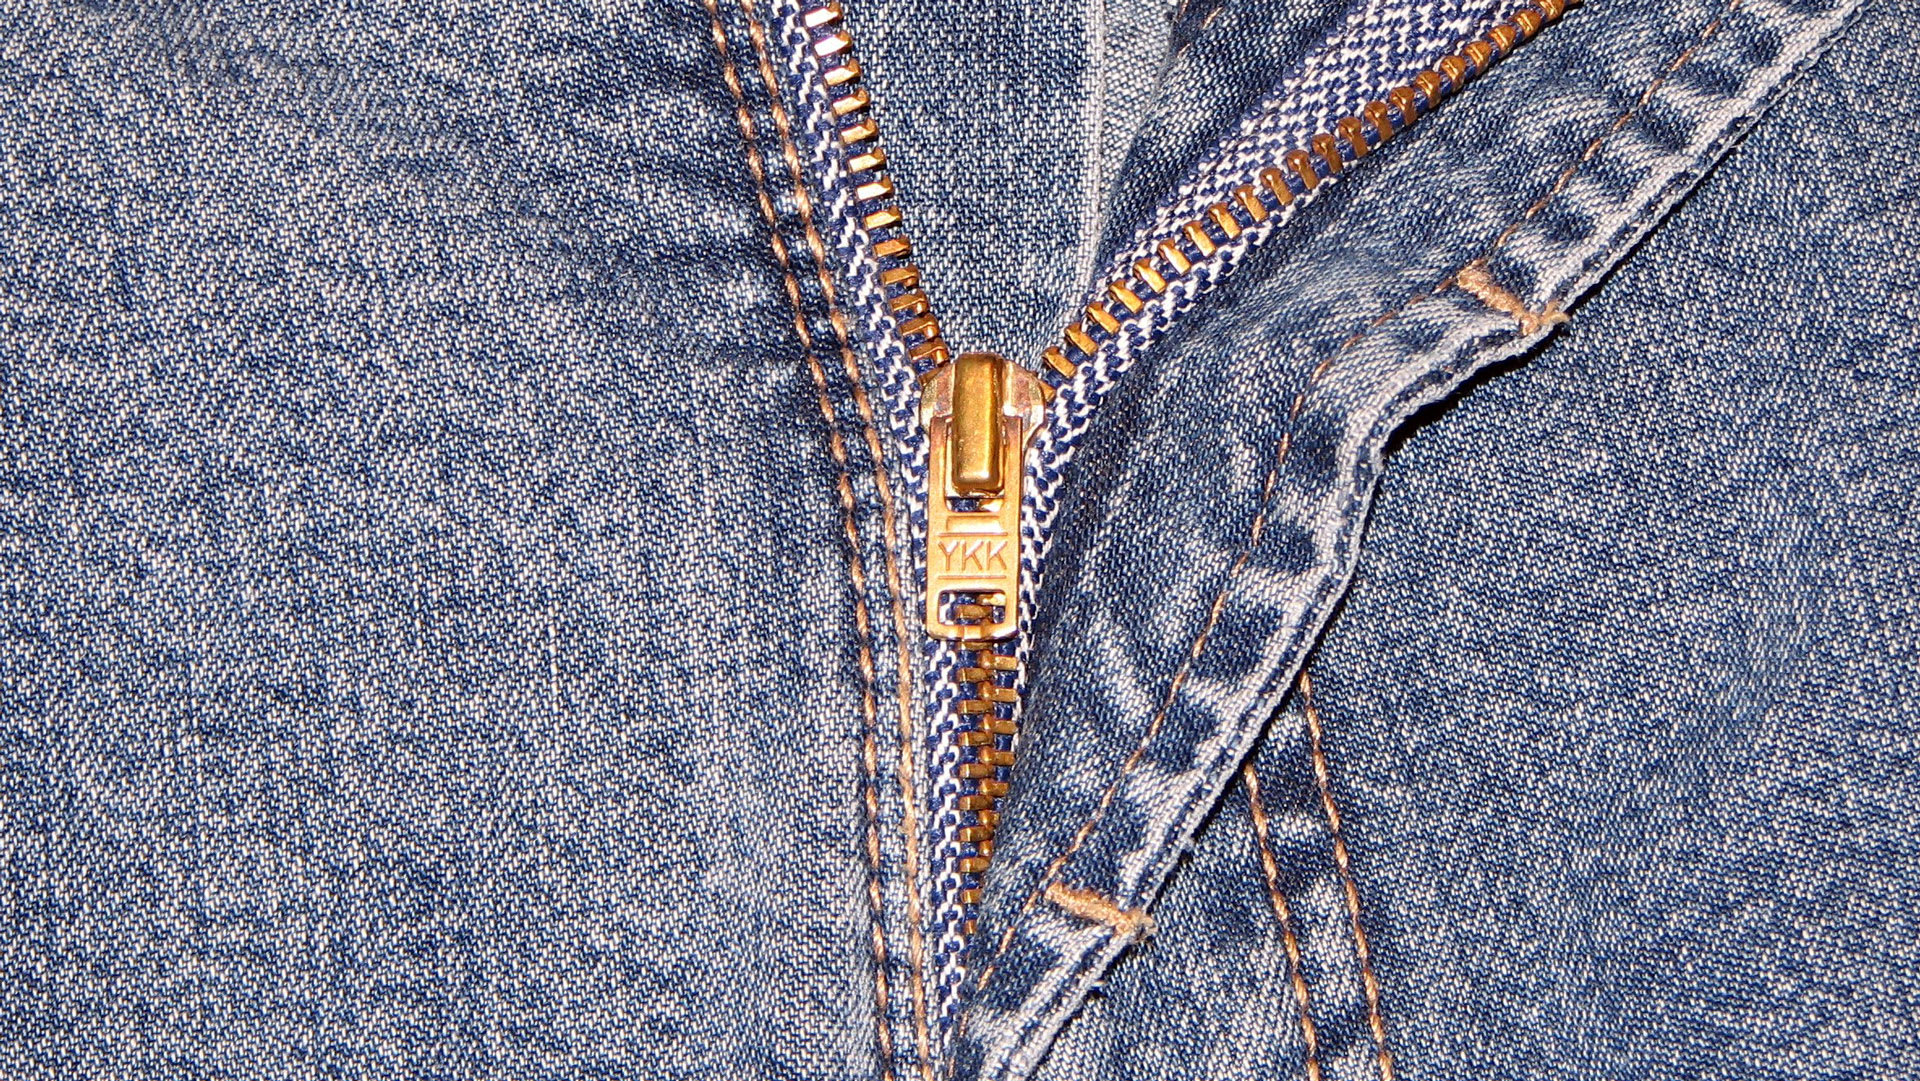 The global zipper war is heating up - Fast Company